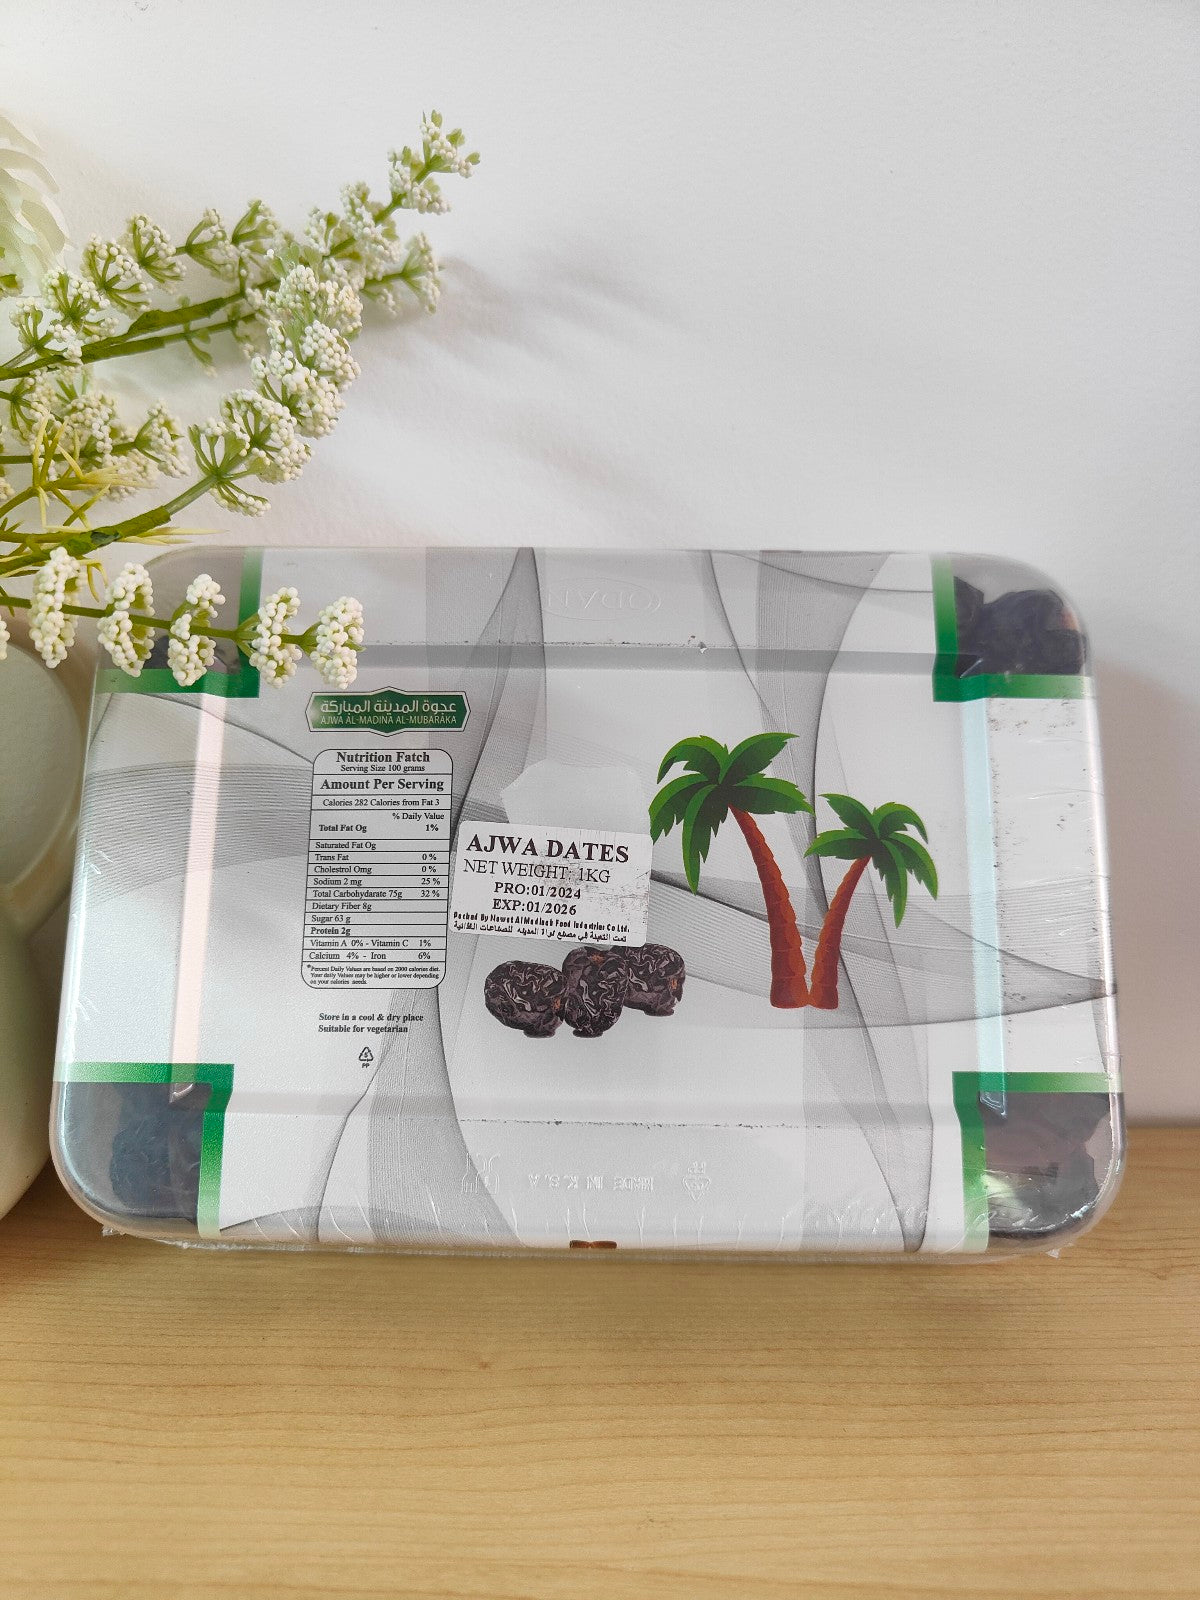 Buy Ajwa Dates online in Australia from Hikmah Boutique, Premium Quality and 2024 Production sourced from farms in Madina. Experience the goodness of this divine superfood and enjoy its nutritional richness. Shop now at reasonable prices.